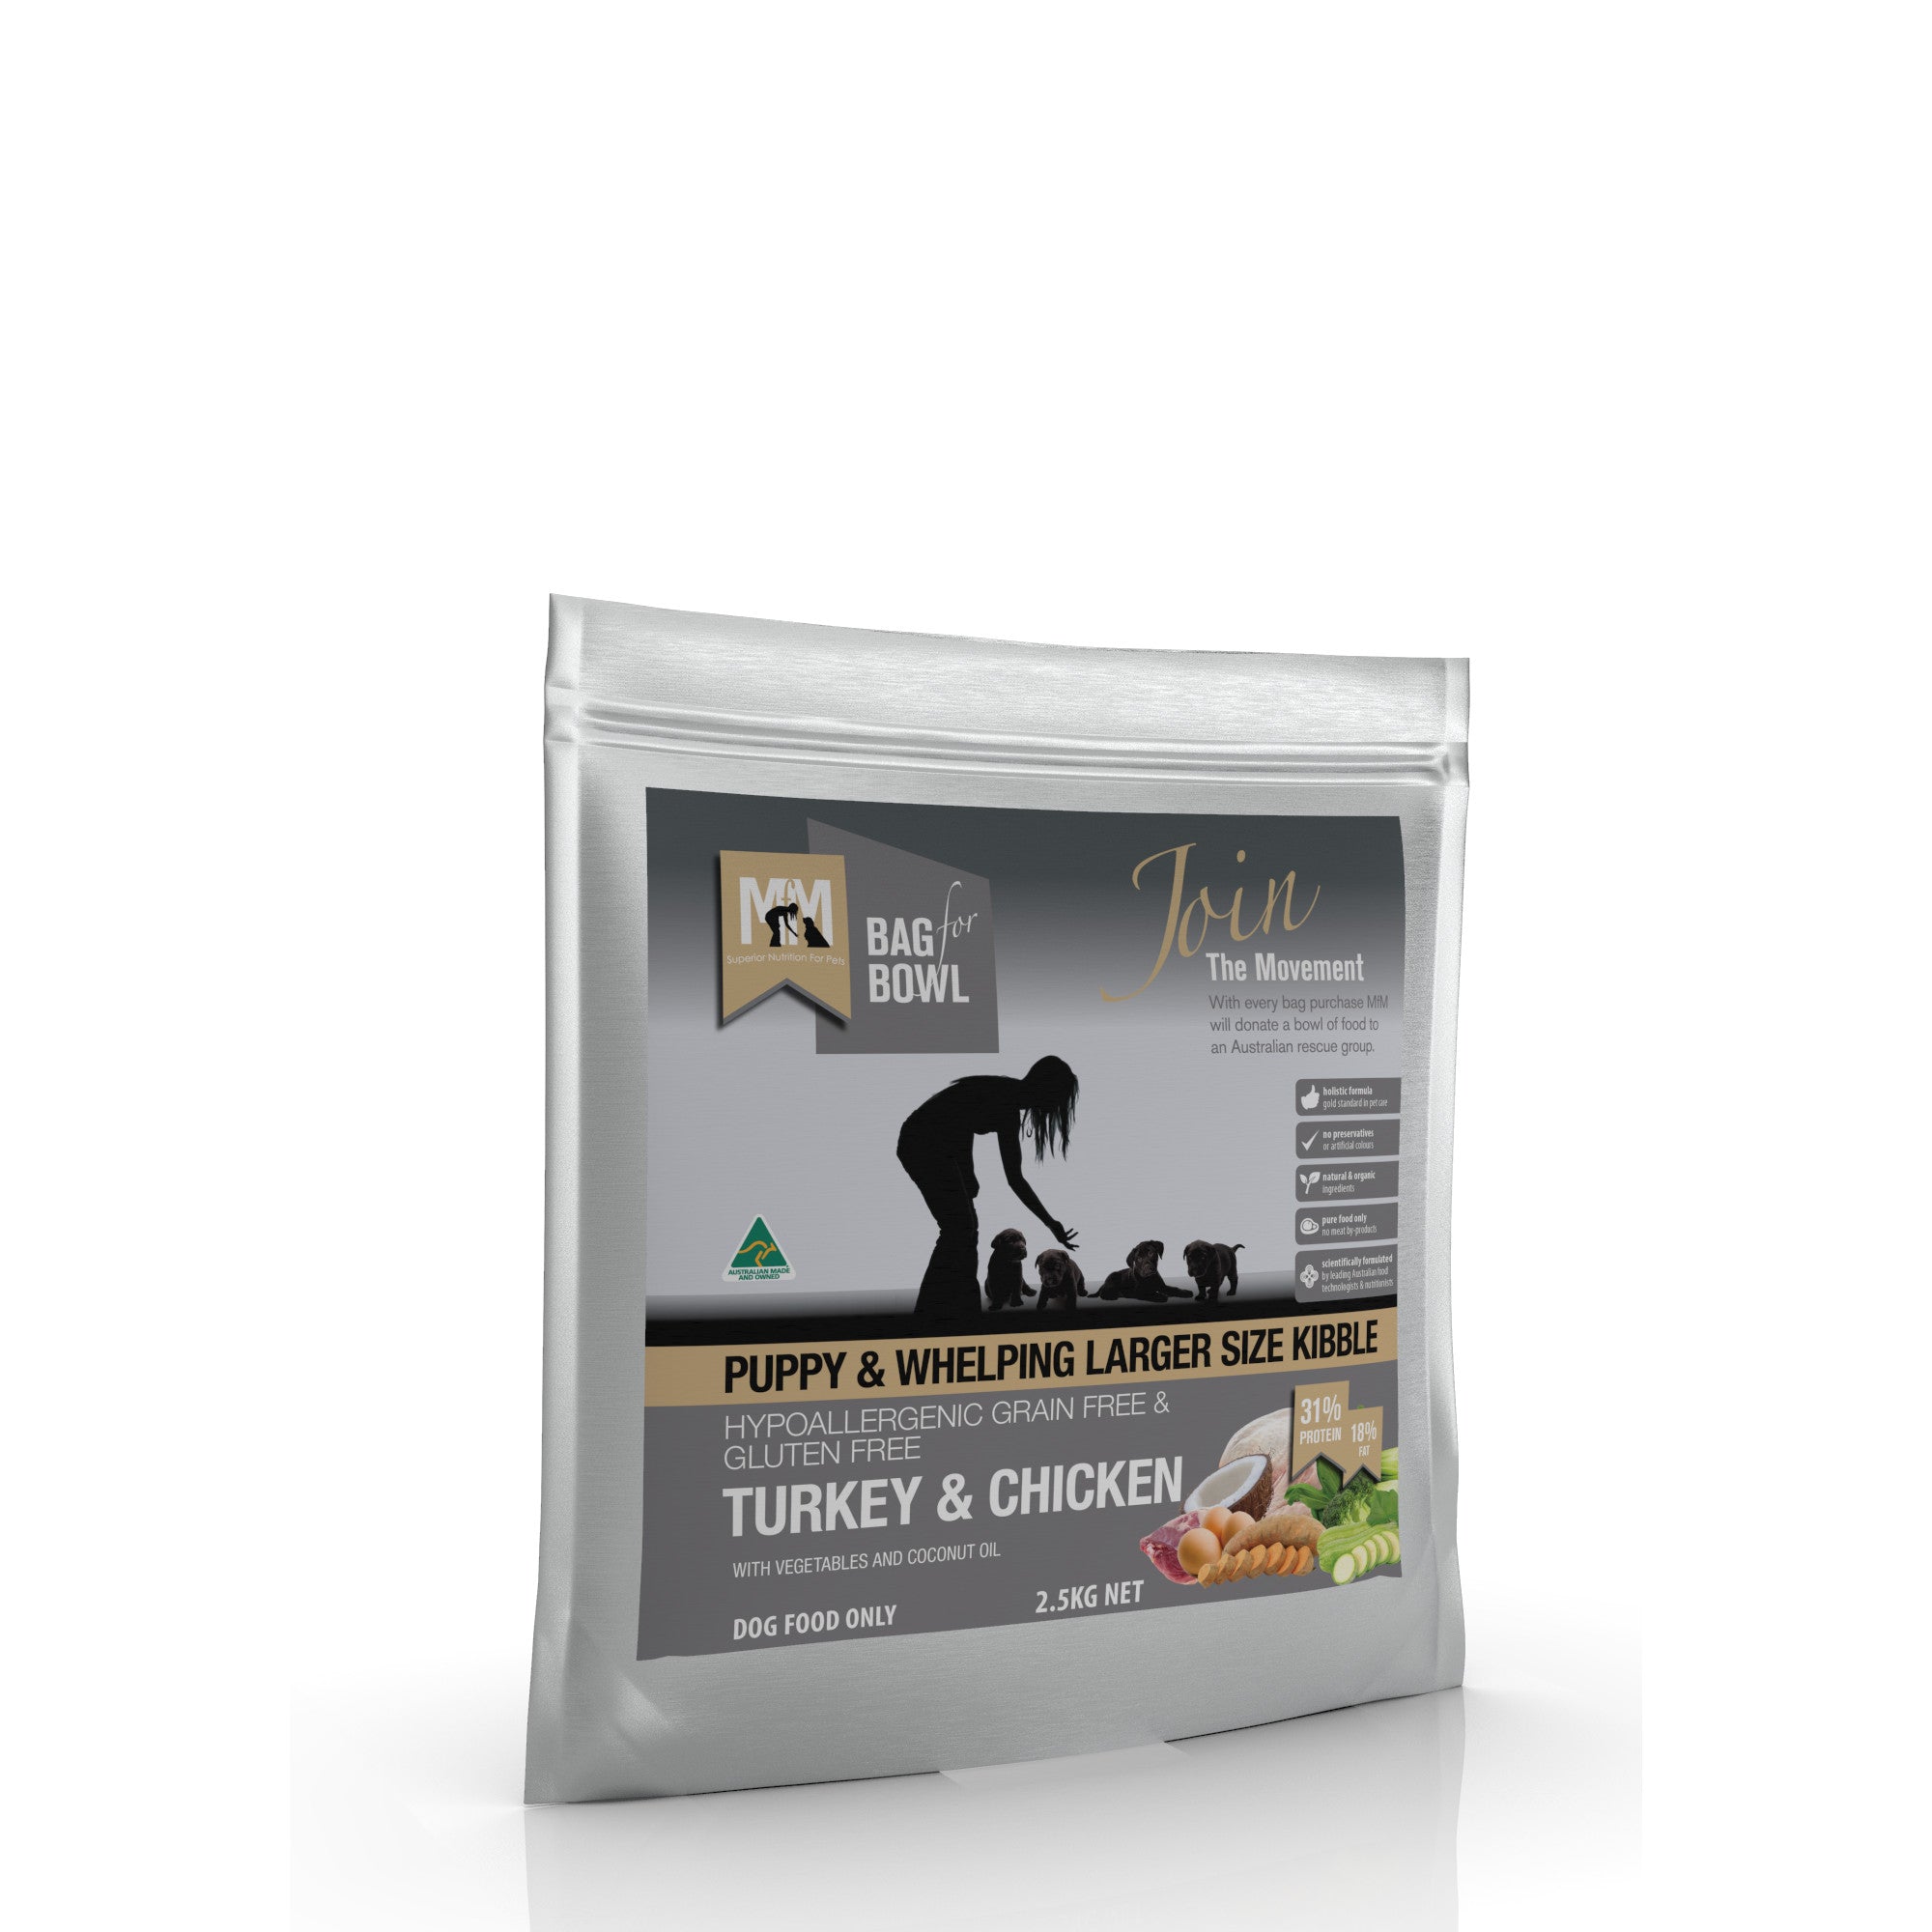 MEALS FOR MUTTS Turkey & Chicken Large Kibble Dry Puppy Food 2.5kg.